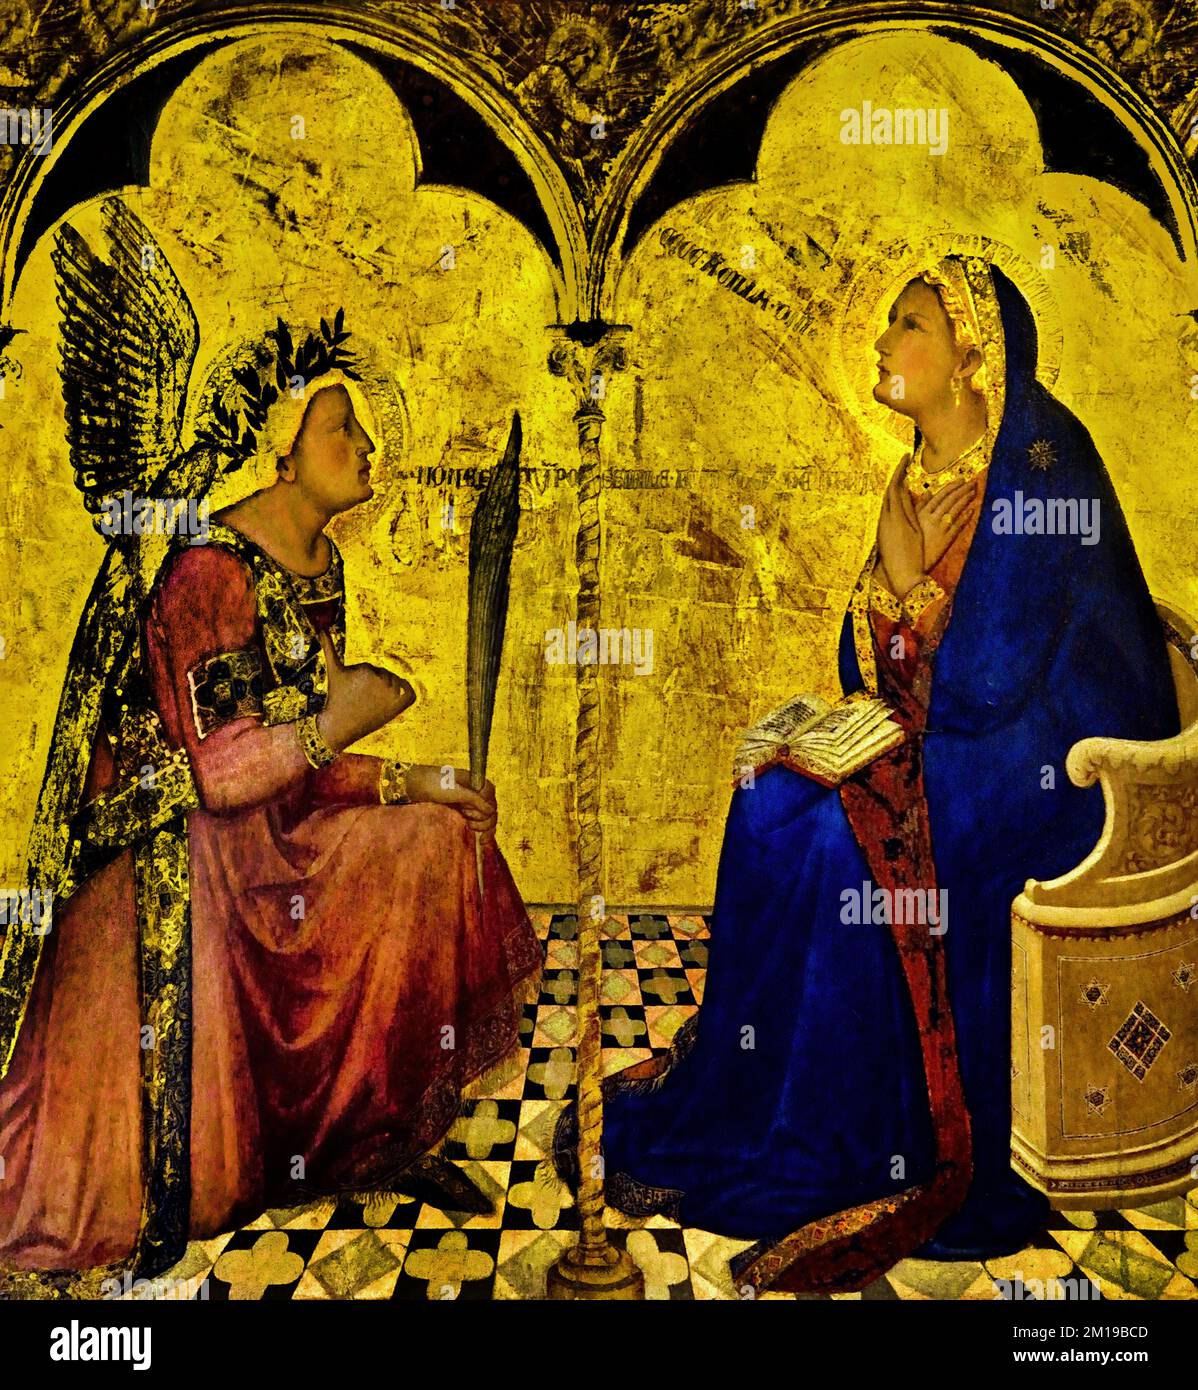 Ambrogio Lorenzetti - Siena, known from 1319 to 1348 (painting) Annunciation  Christian Art, Italy, Italian. ( Annunciation is a painting by the Italian late medieval painter Ambrogio Lorenzetti, signed and dated 1344 ) , Archangel Gabriel, announces to the ,Virgin Mary, that she has been chosen to be the, mother of Jesus, birth of Christ, Stock Photo